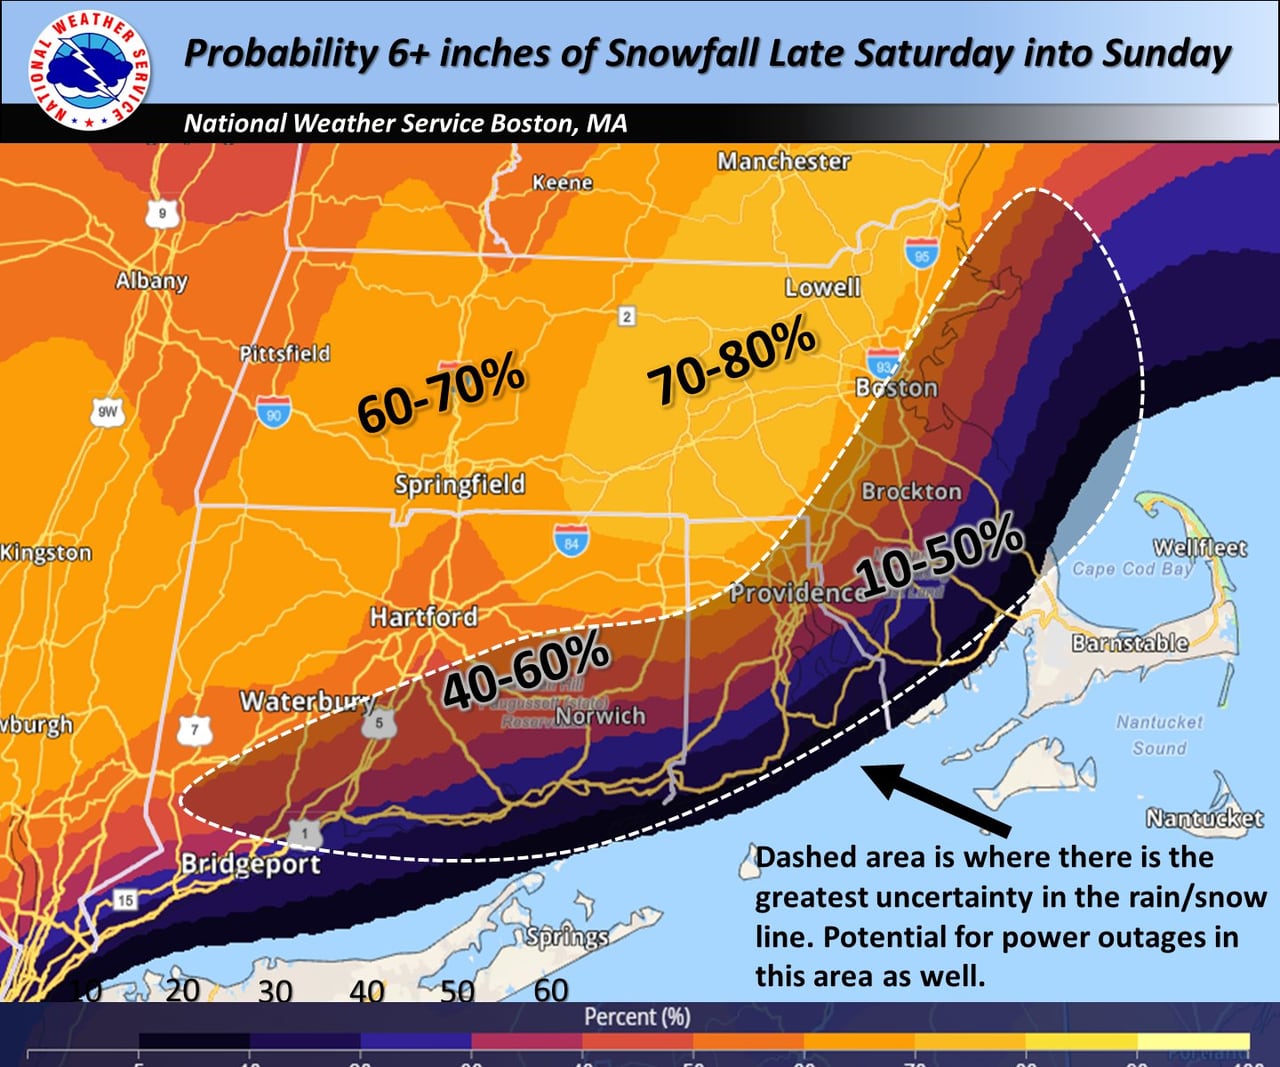 6+ Inches of Snow Probability